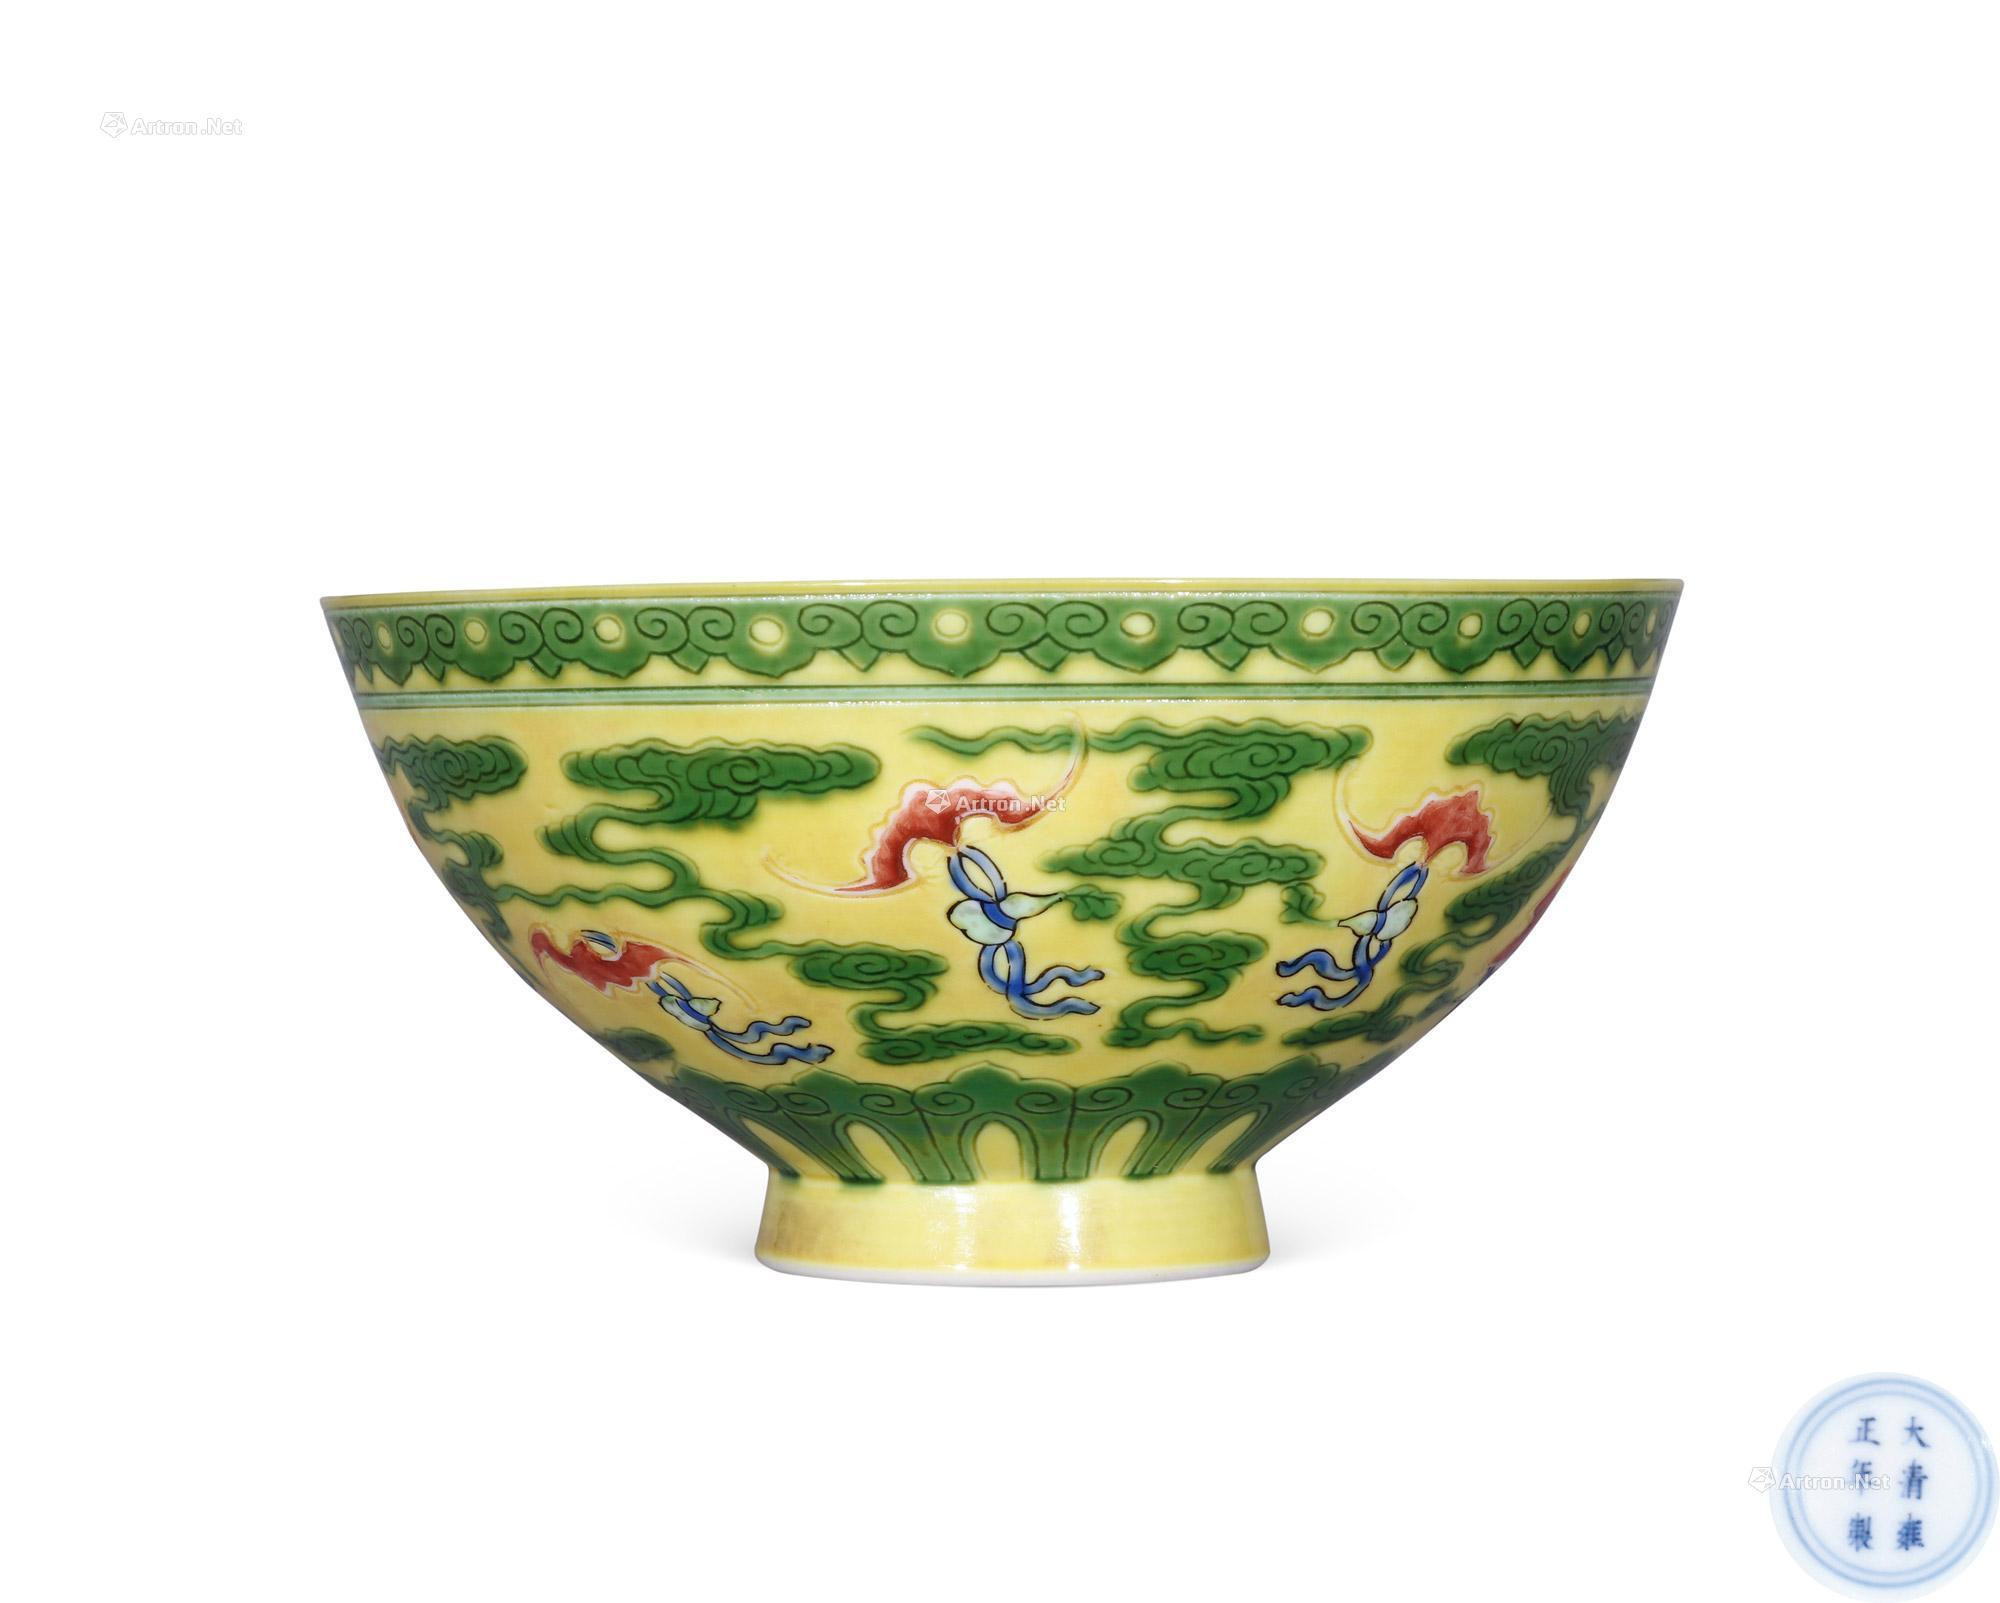 A YELLOW-GROUND GREEN ENAMELLED ‘BAT’ BOWL WITH POLYCHROME DETAILS